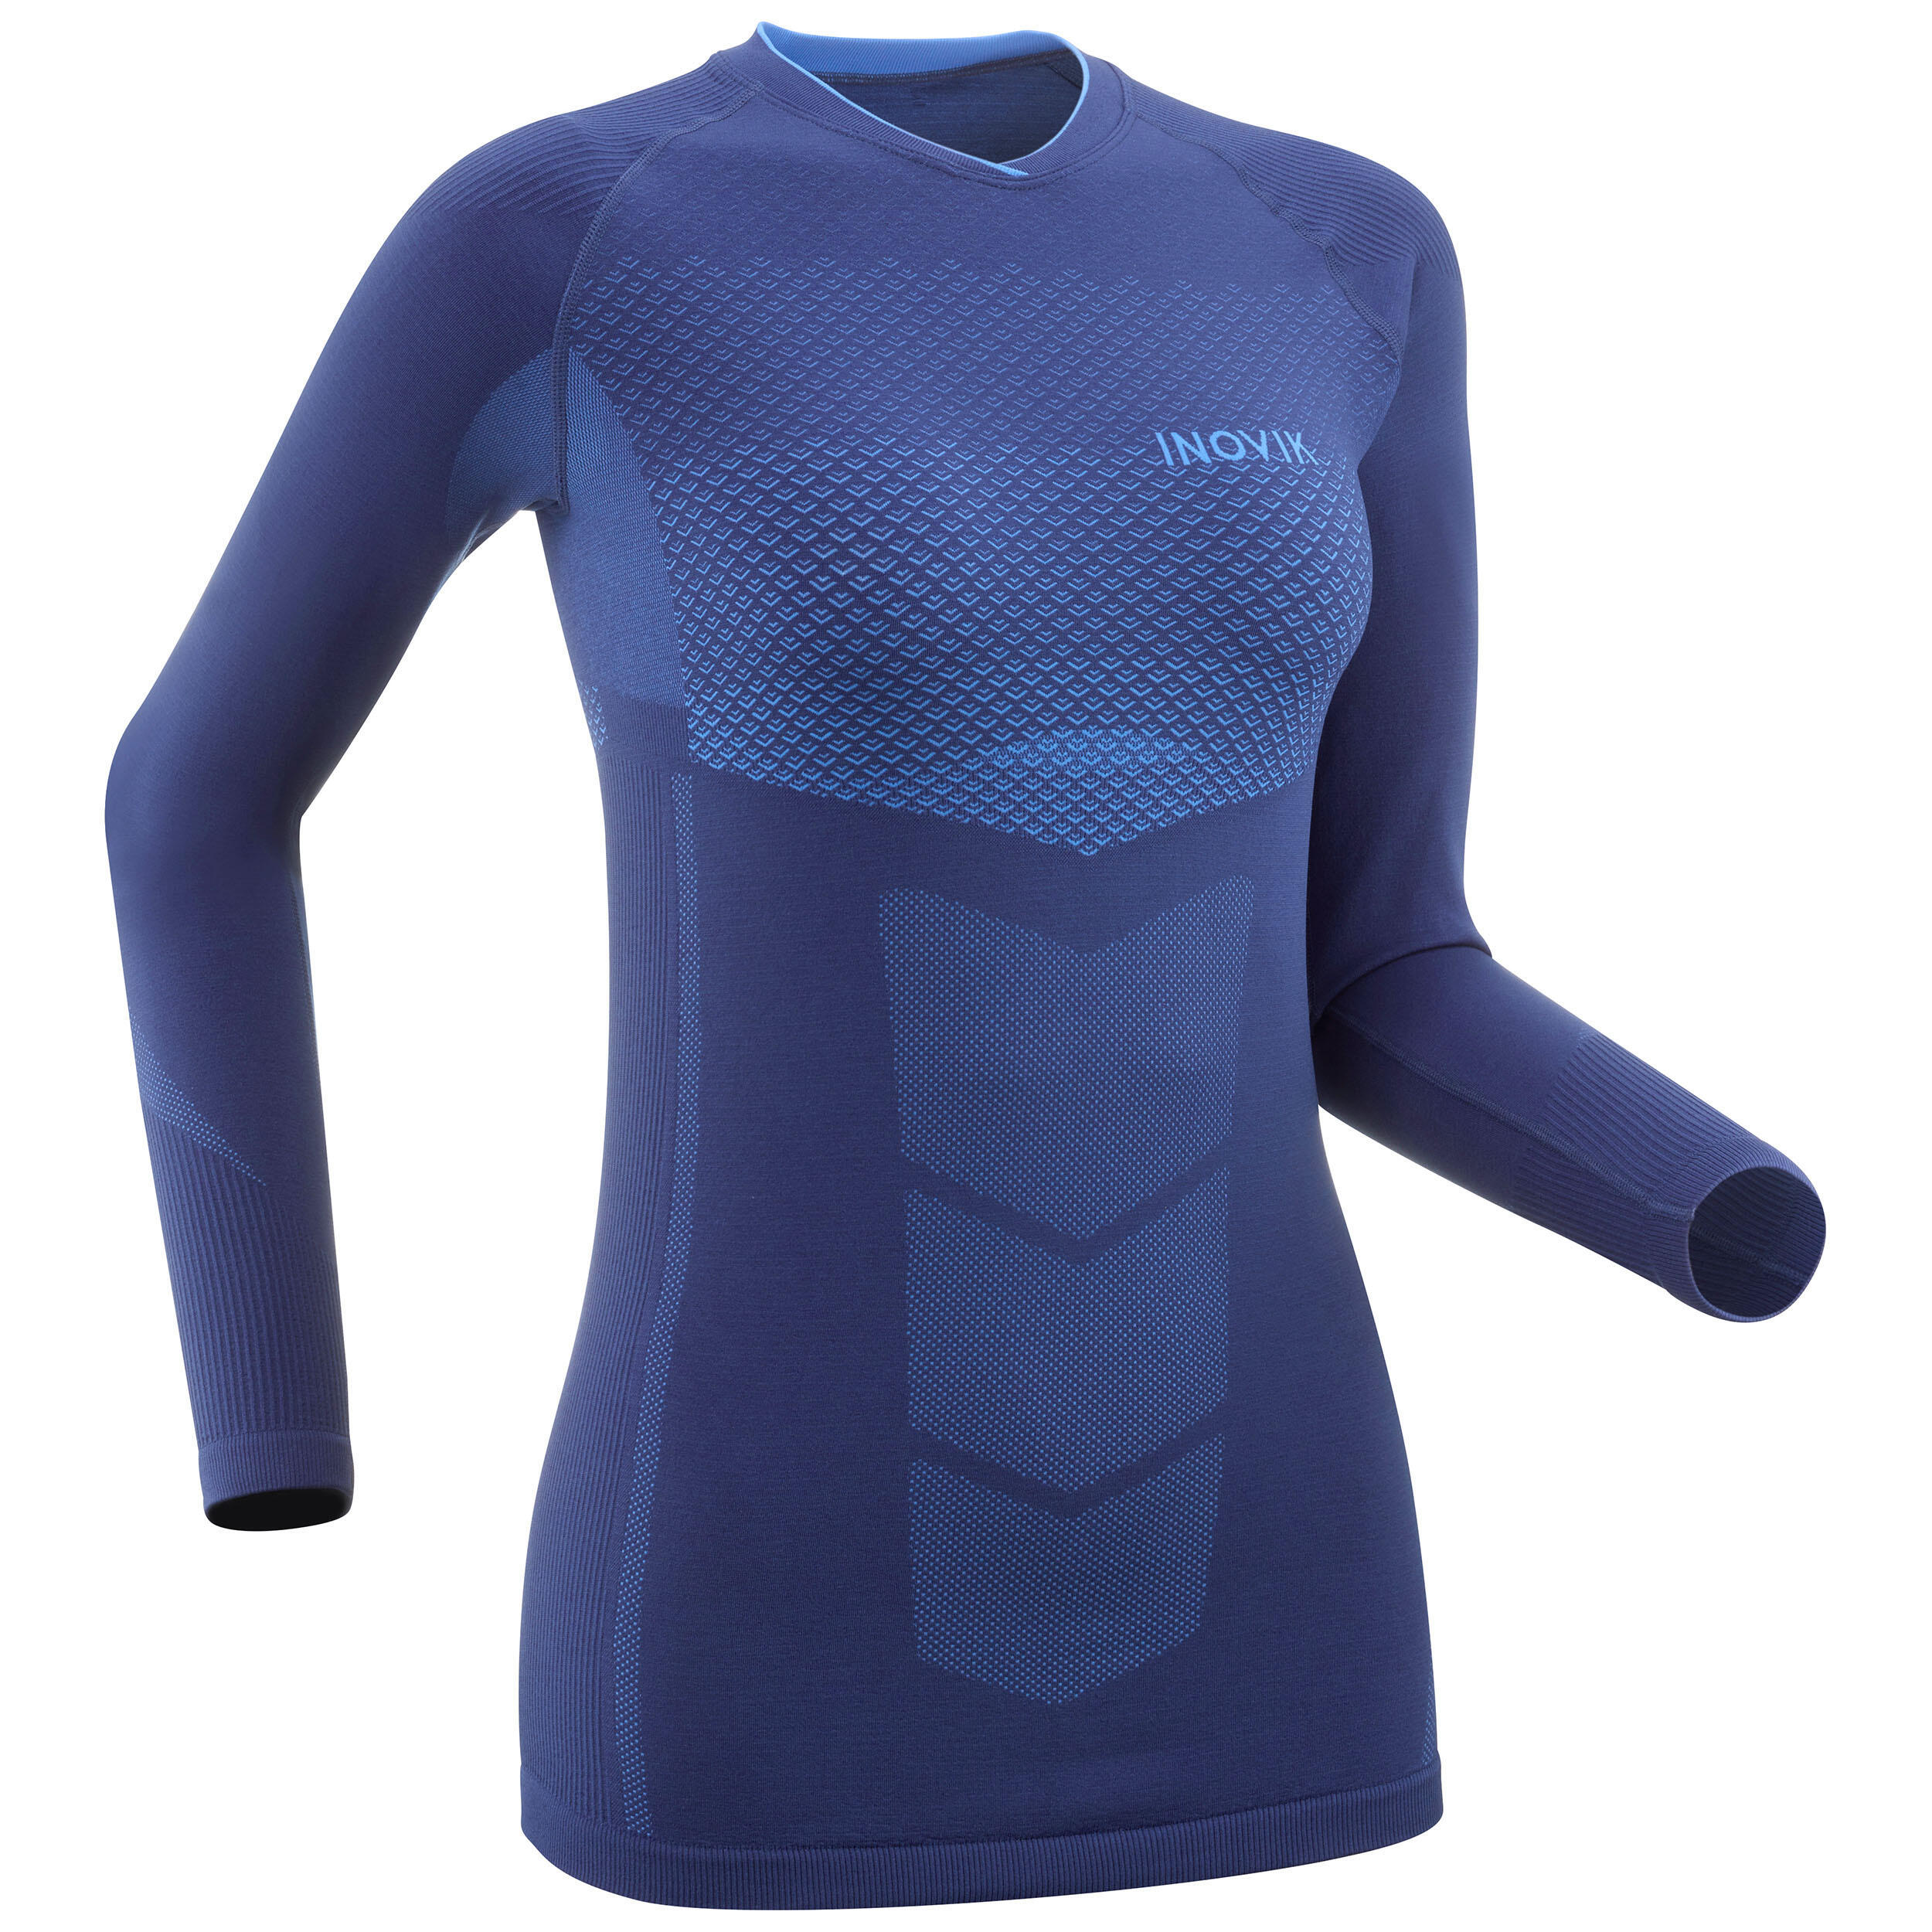 NEVICA Women's Banff Thermal Base Layer Long-Sleeve Top - Eastern